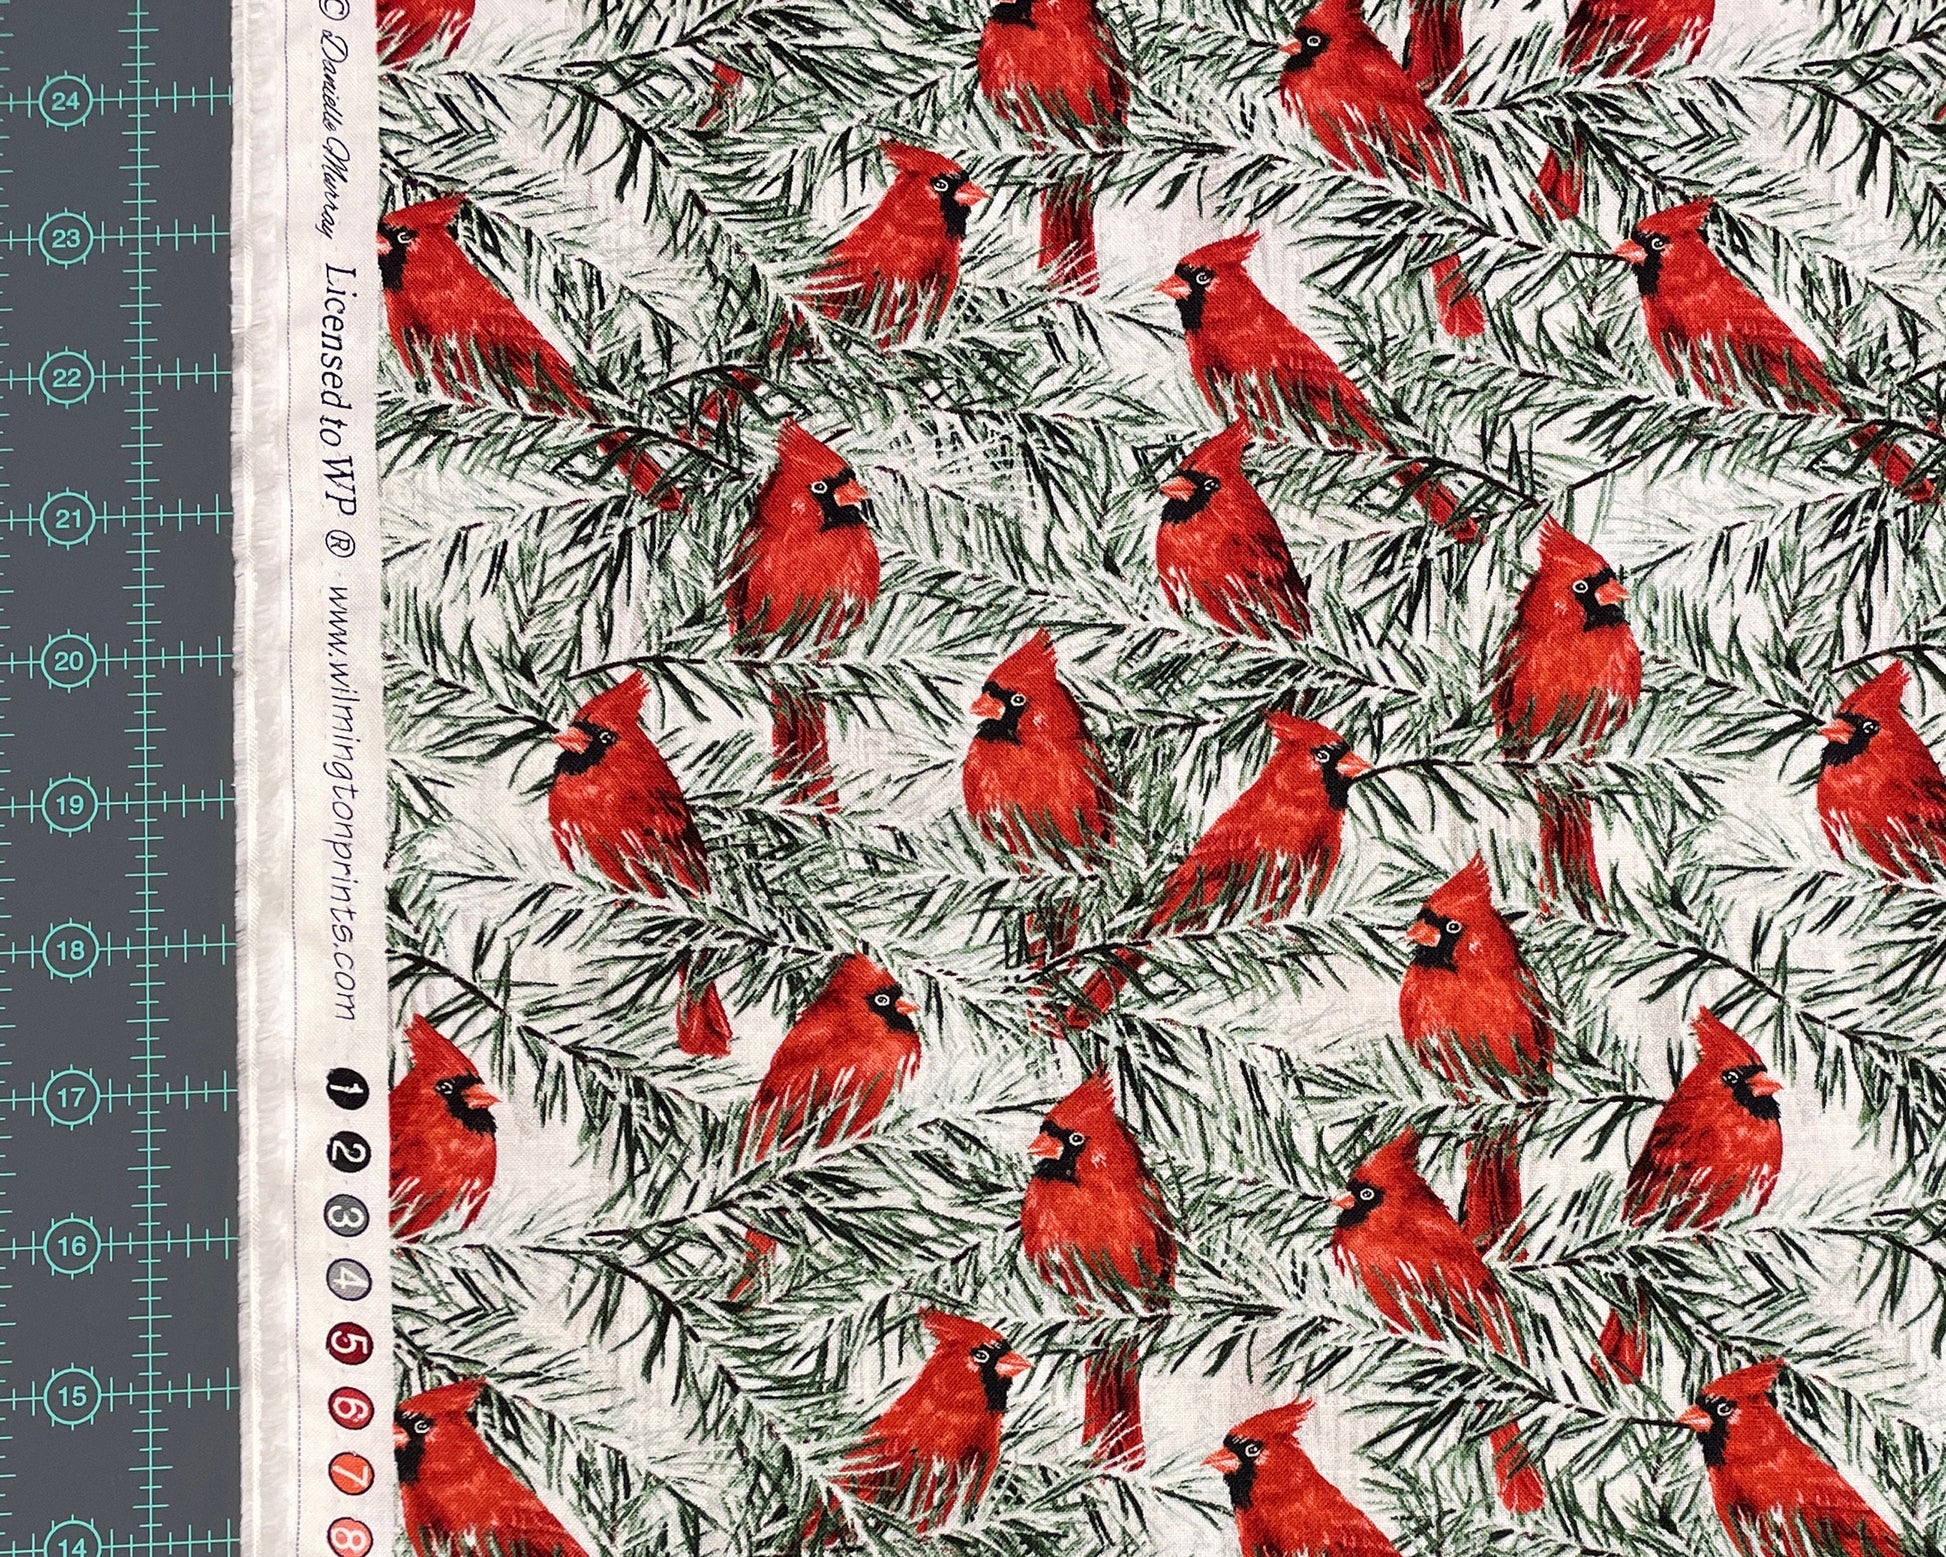 Christmas Cardinal Fabric - NEW! Country Cardinals by Wilmington Prints - 100% cotton - cardinal material Winter Holiday - Ships NEXT DAY